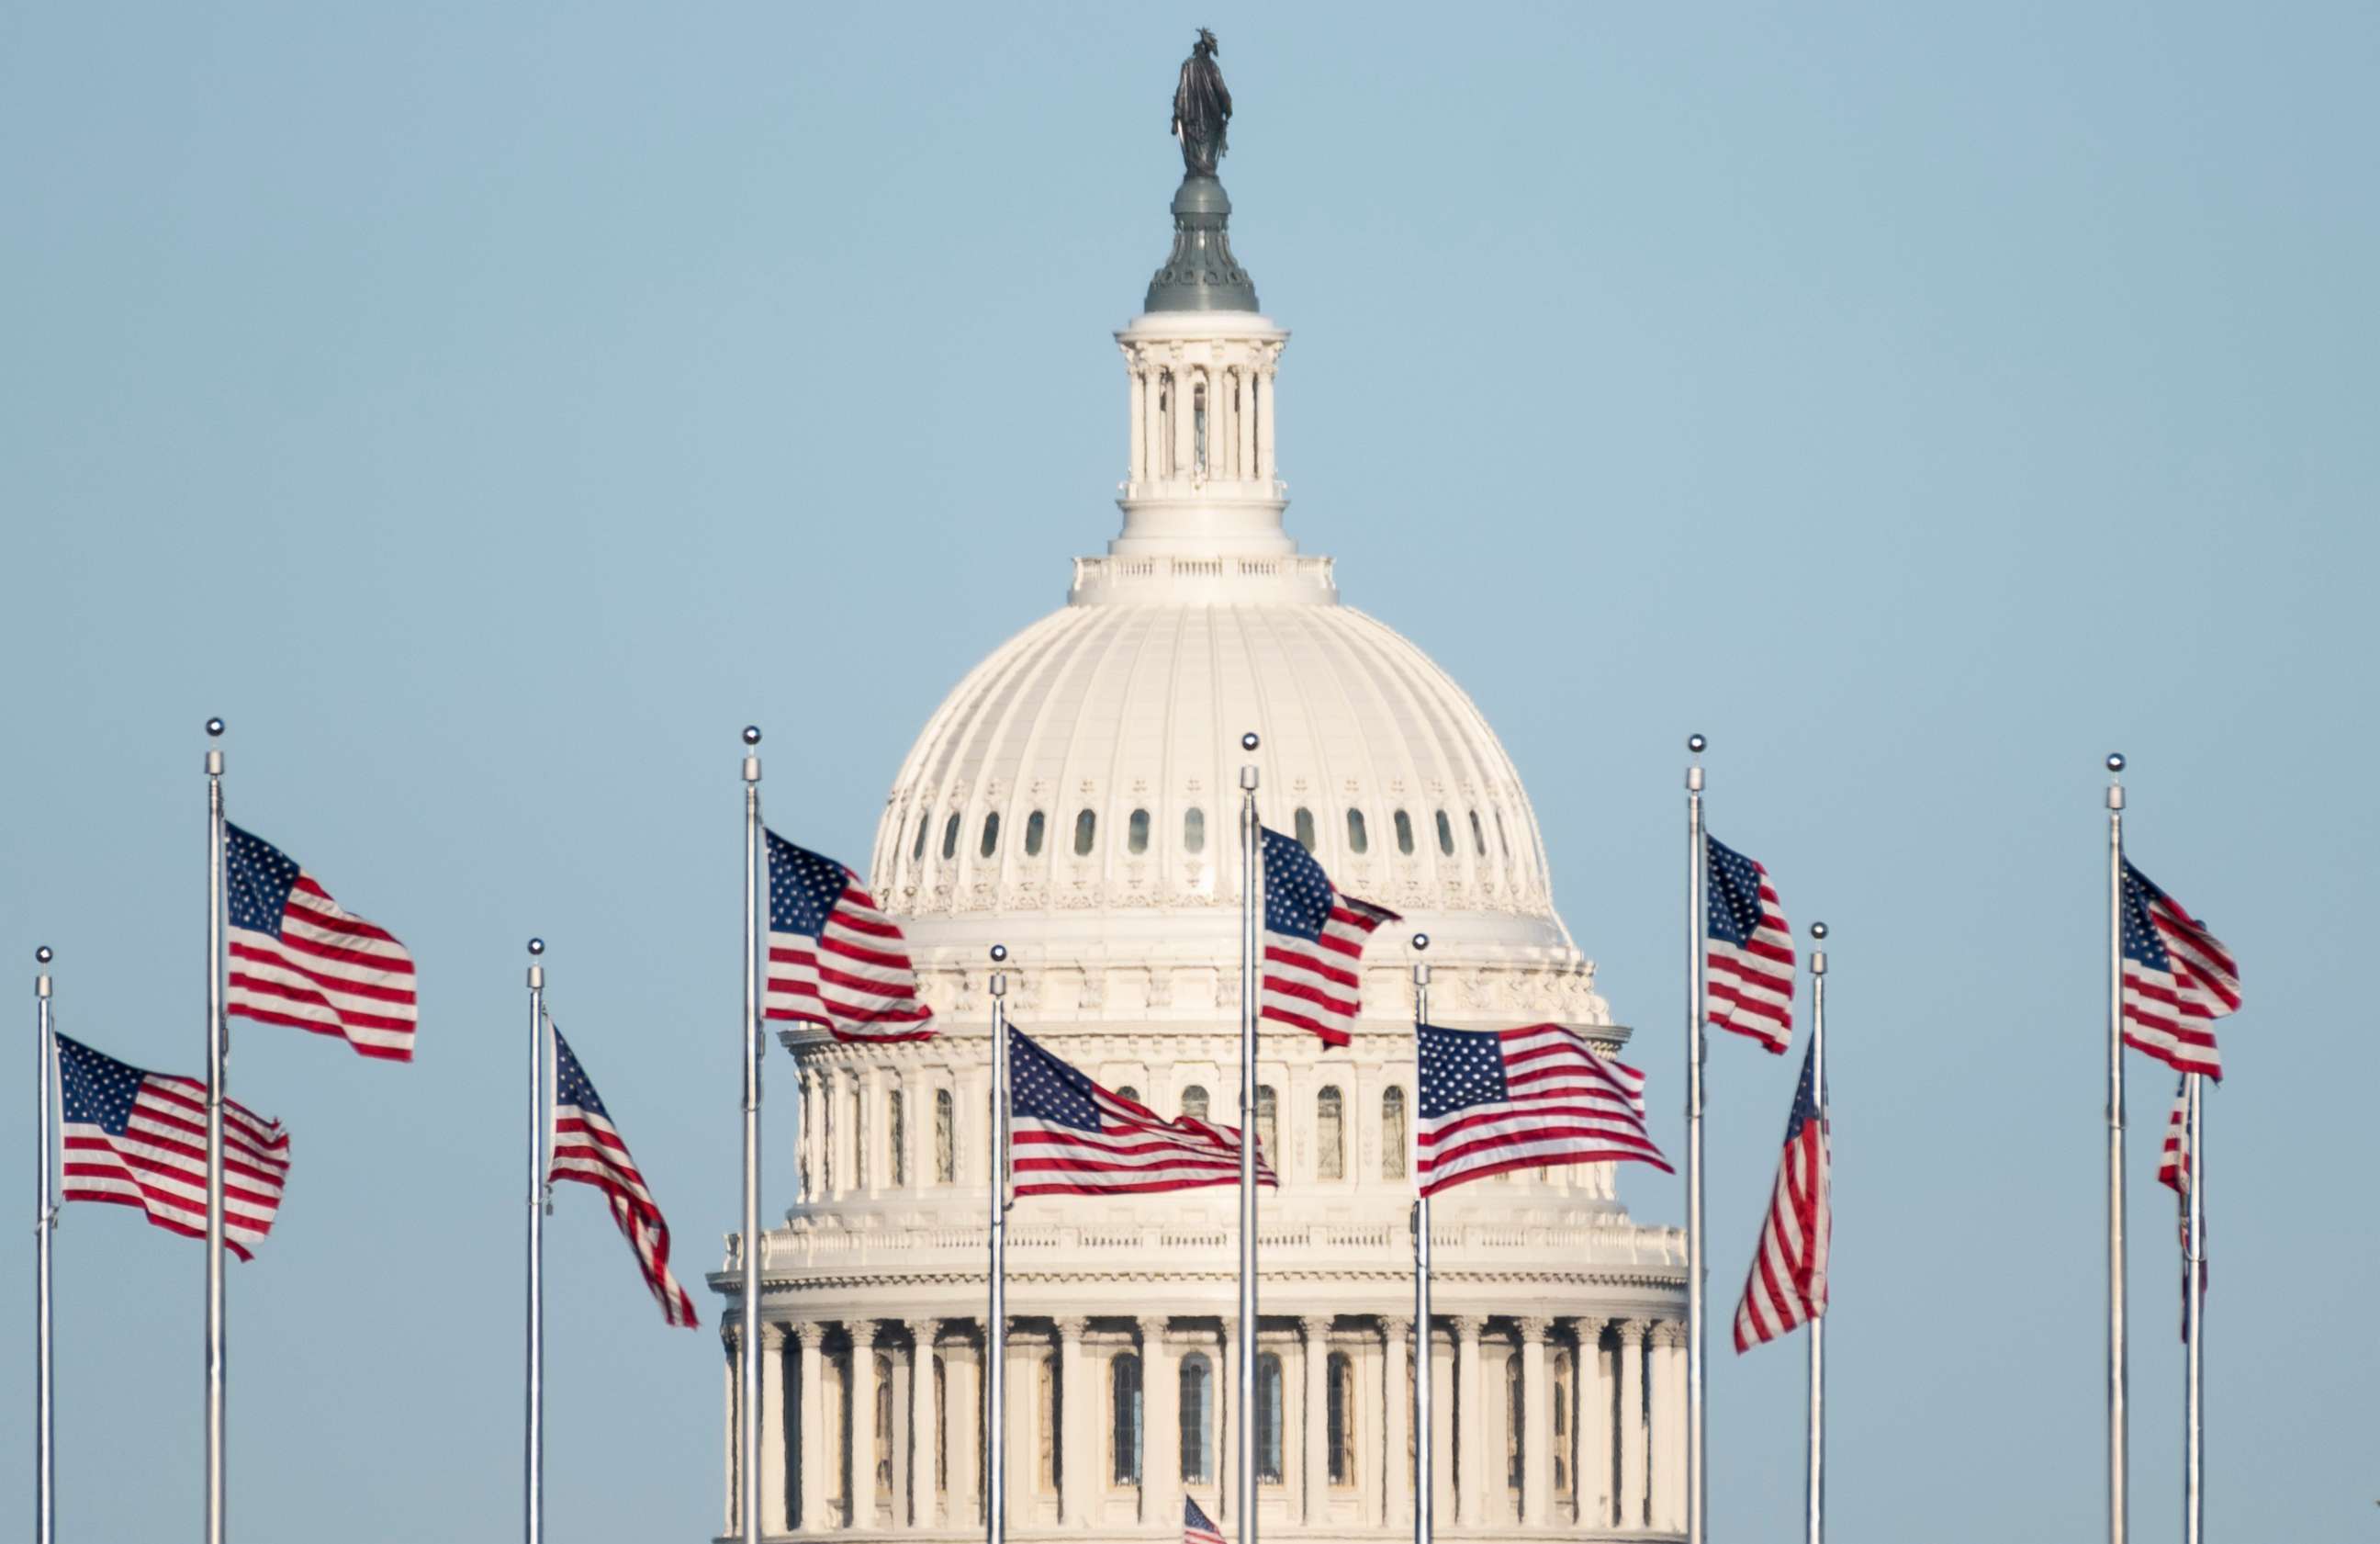 PHOTO: The U.S. Capitol dome is seen behind the American flags at the base of the Washington Monument in Washington, March 29, 2021.